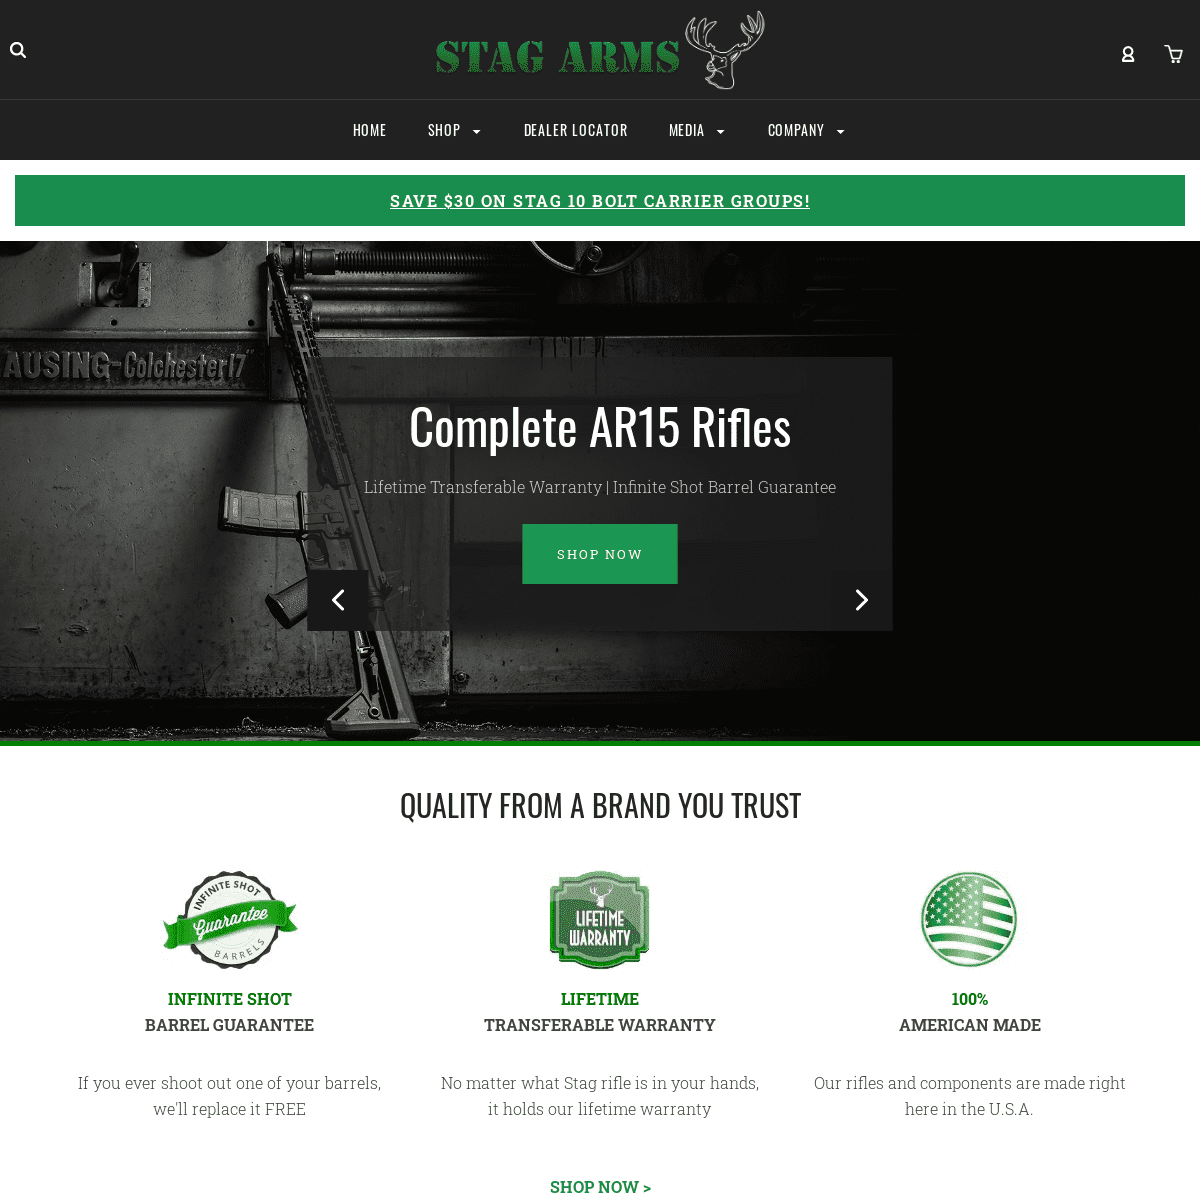 A complete backup of stagarms.com